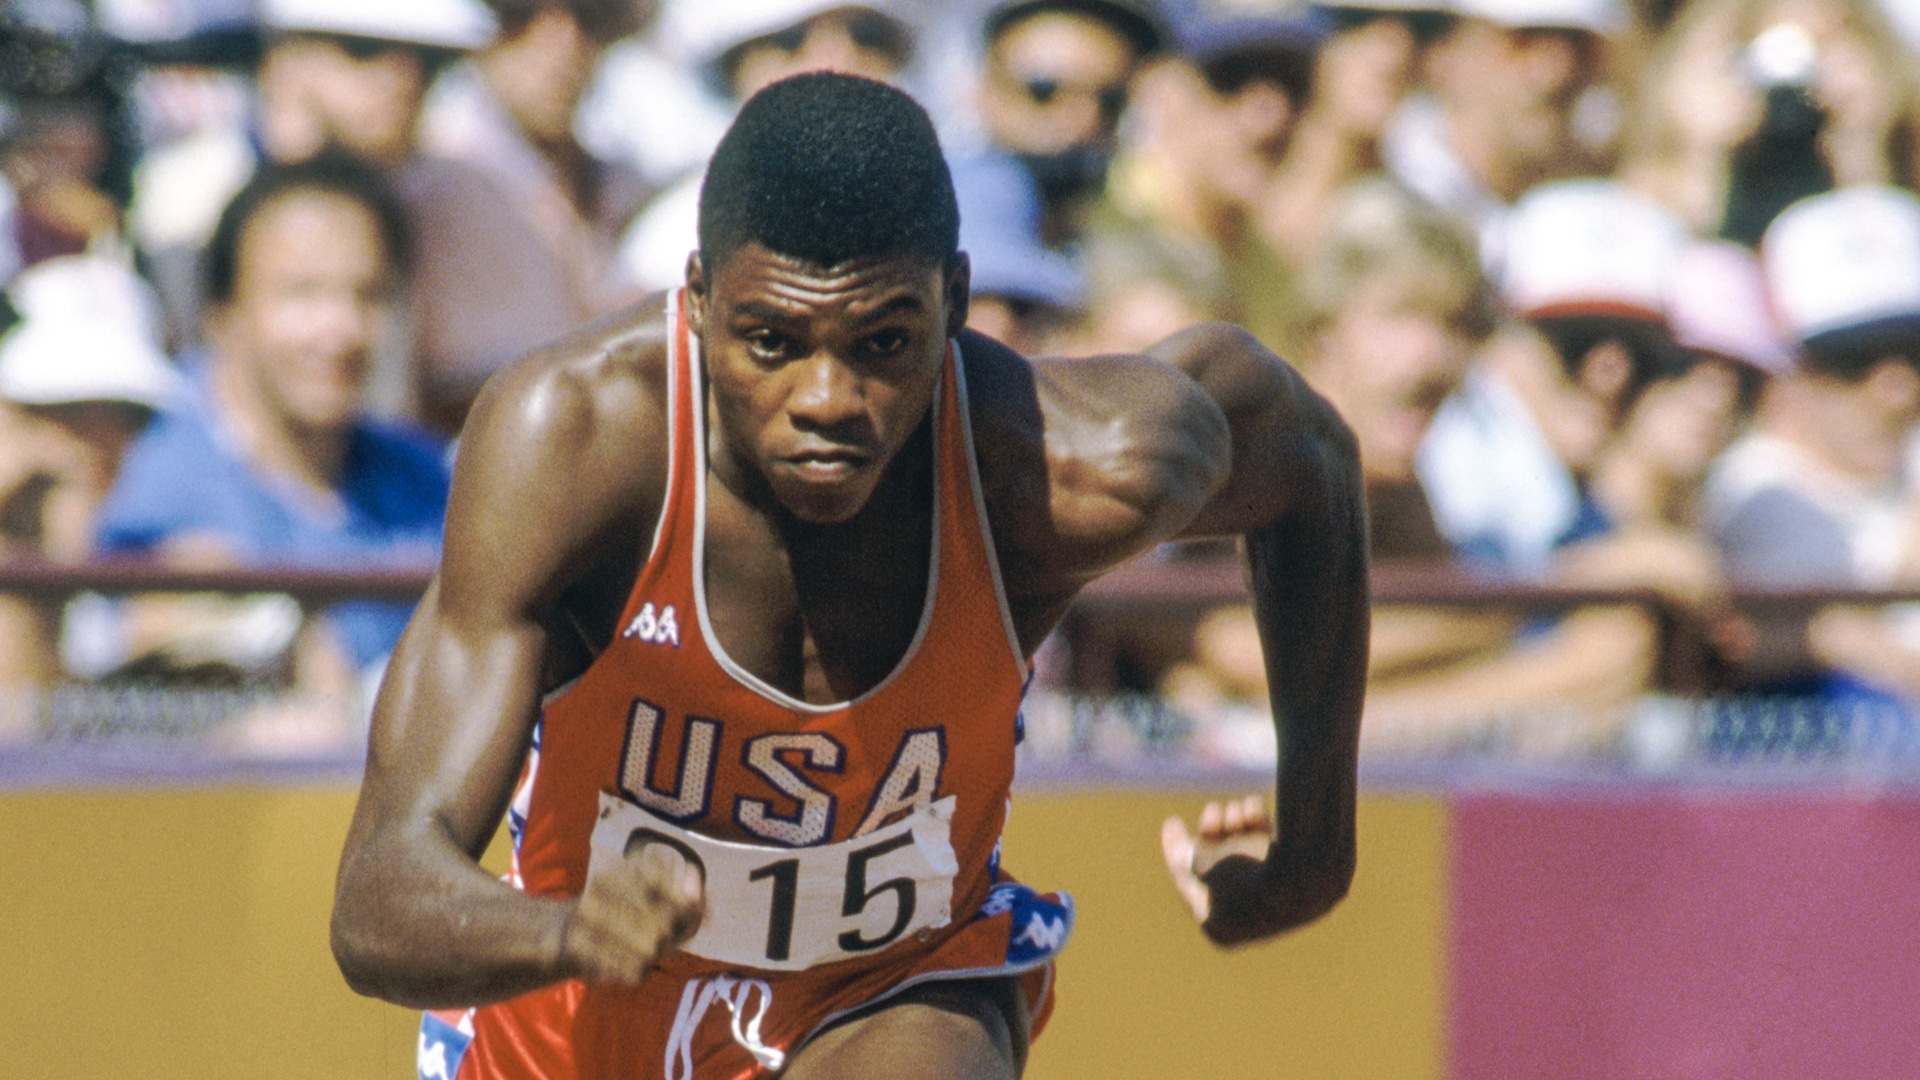 Carl Lewis in a file photo (Image Credits - World Athletics)